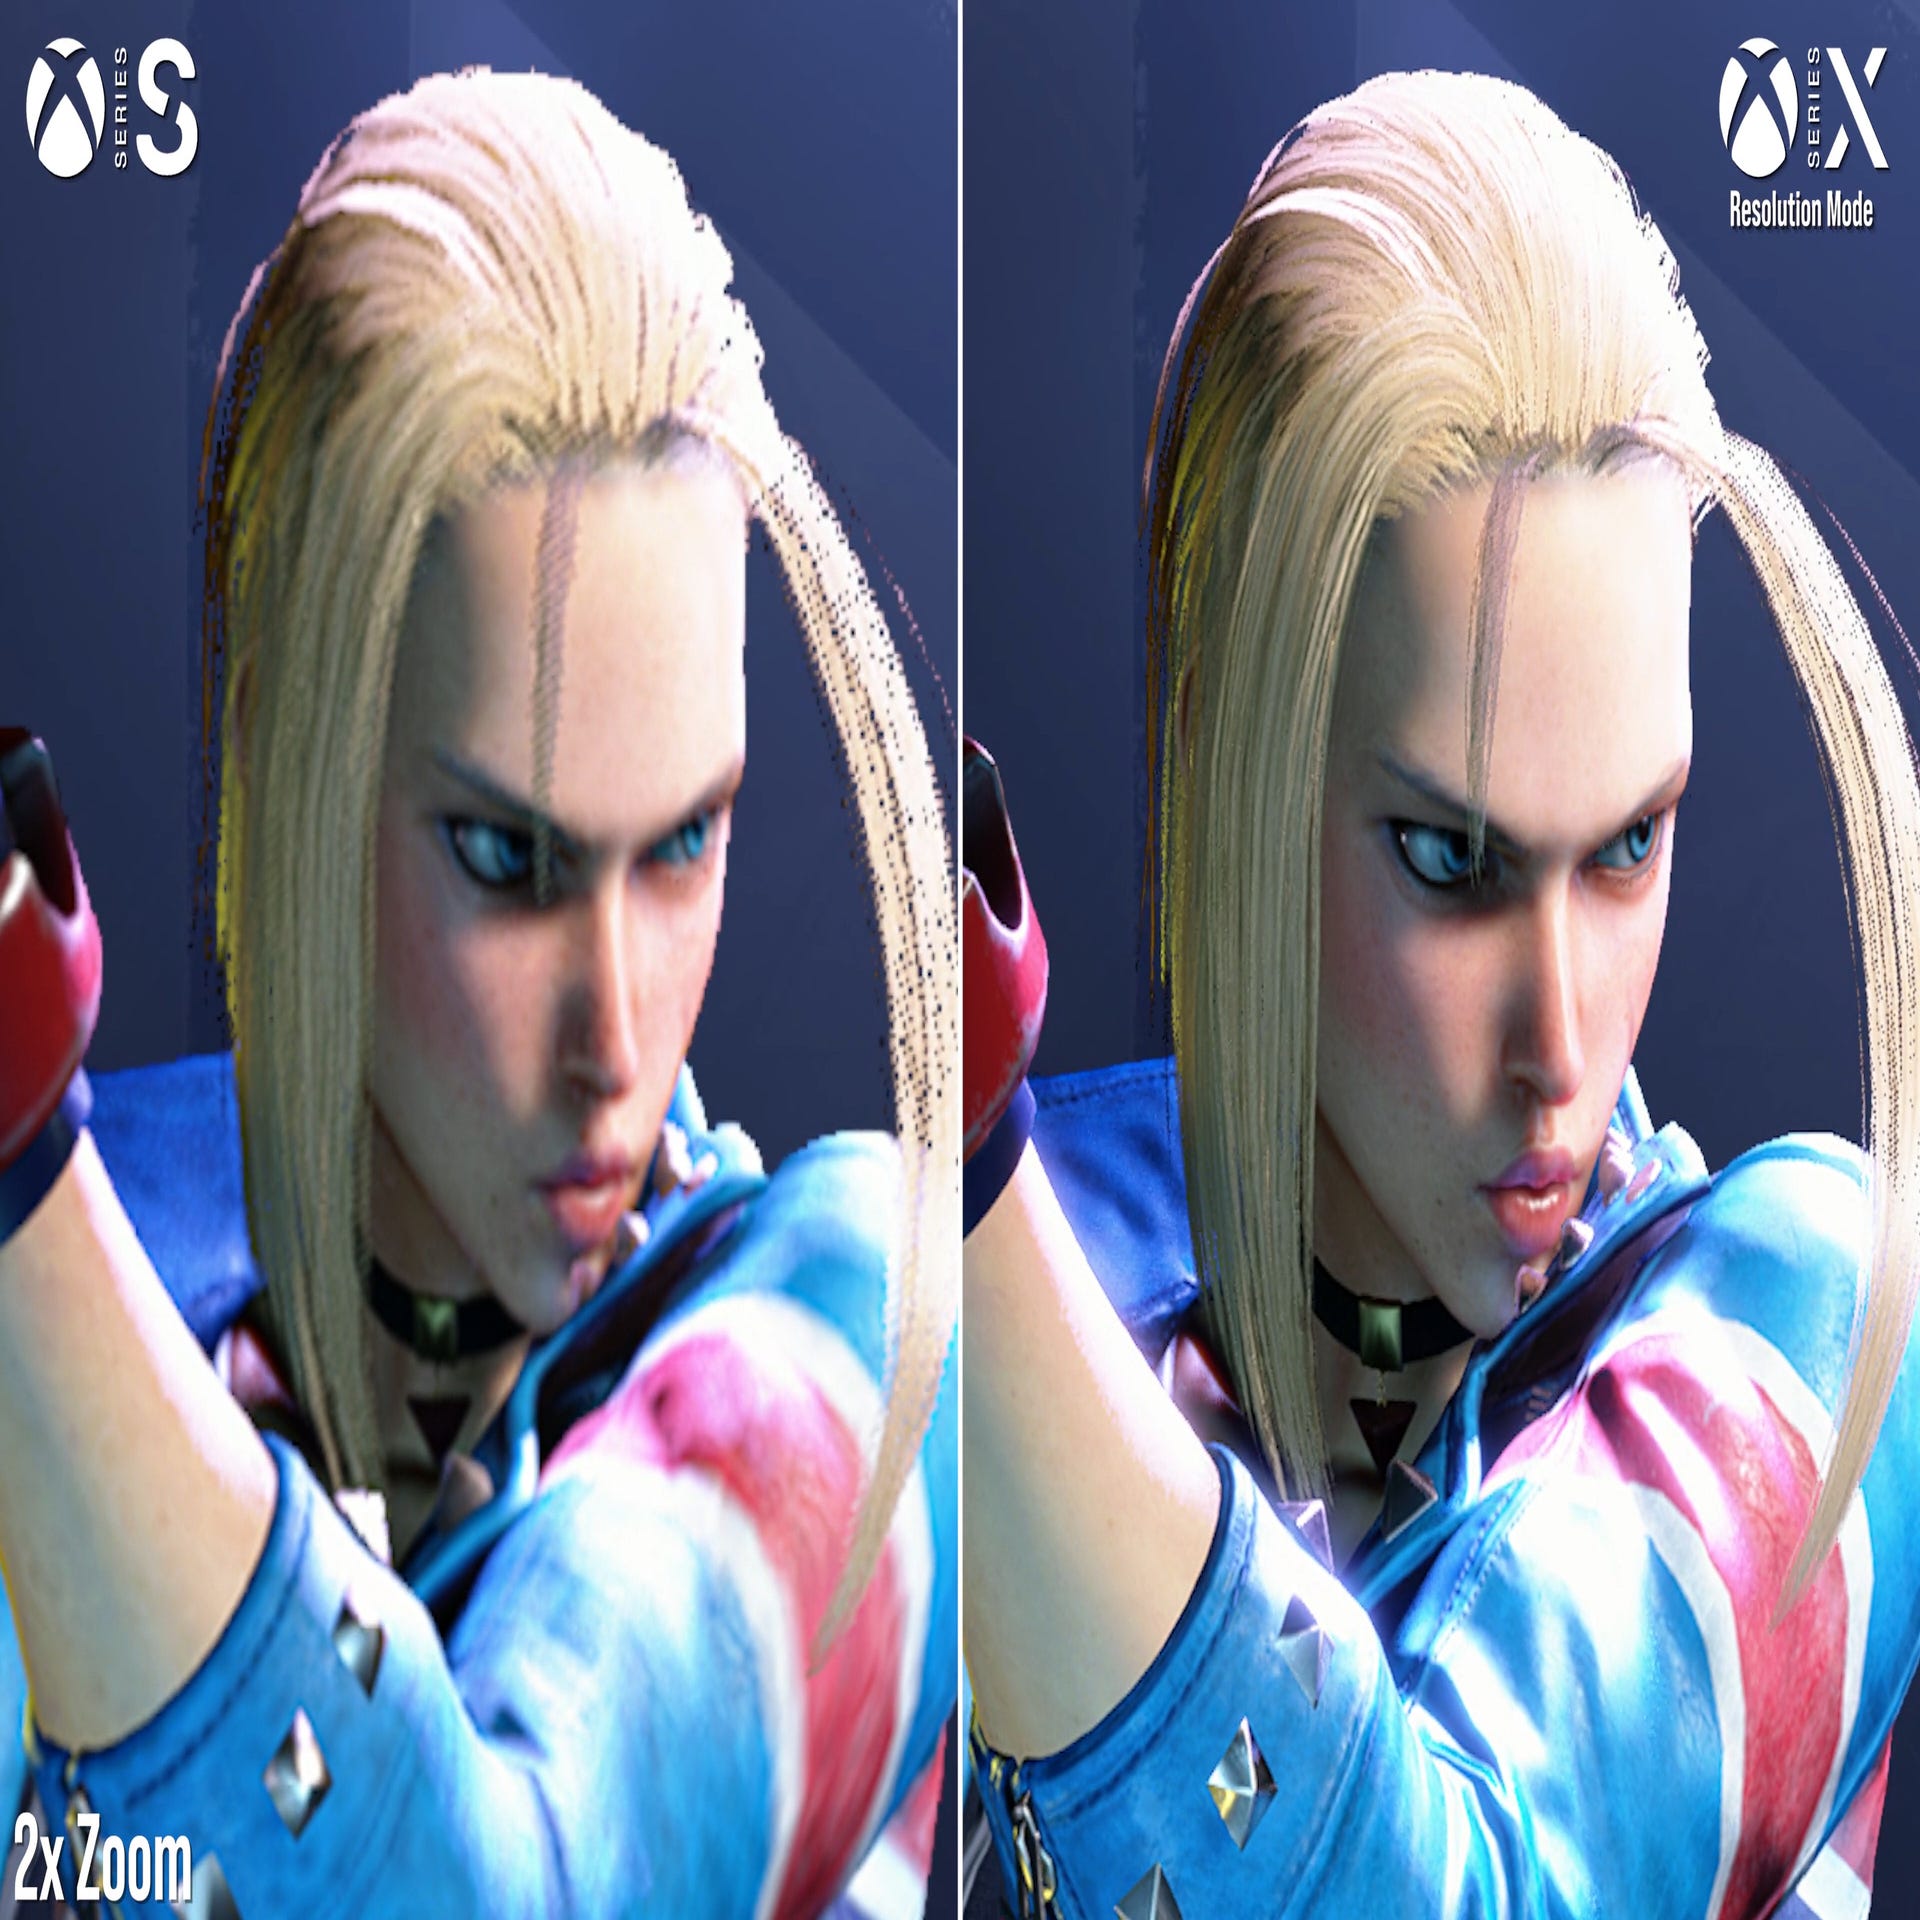 Street Fighter 6, PS4 - PS4 Pro - PS5, Graphics Comparison Demo